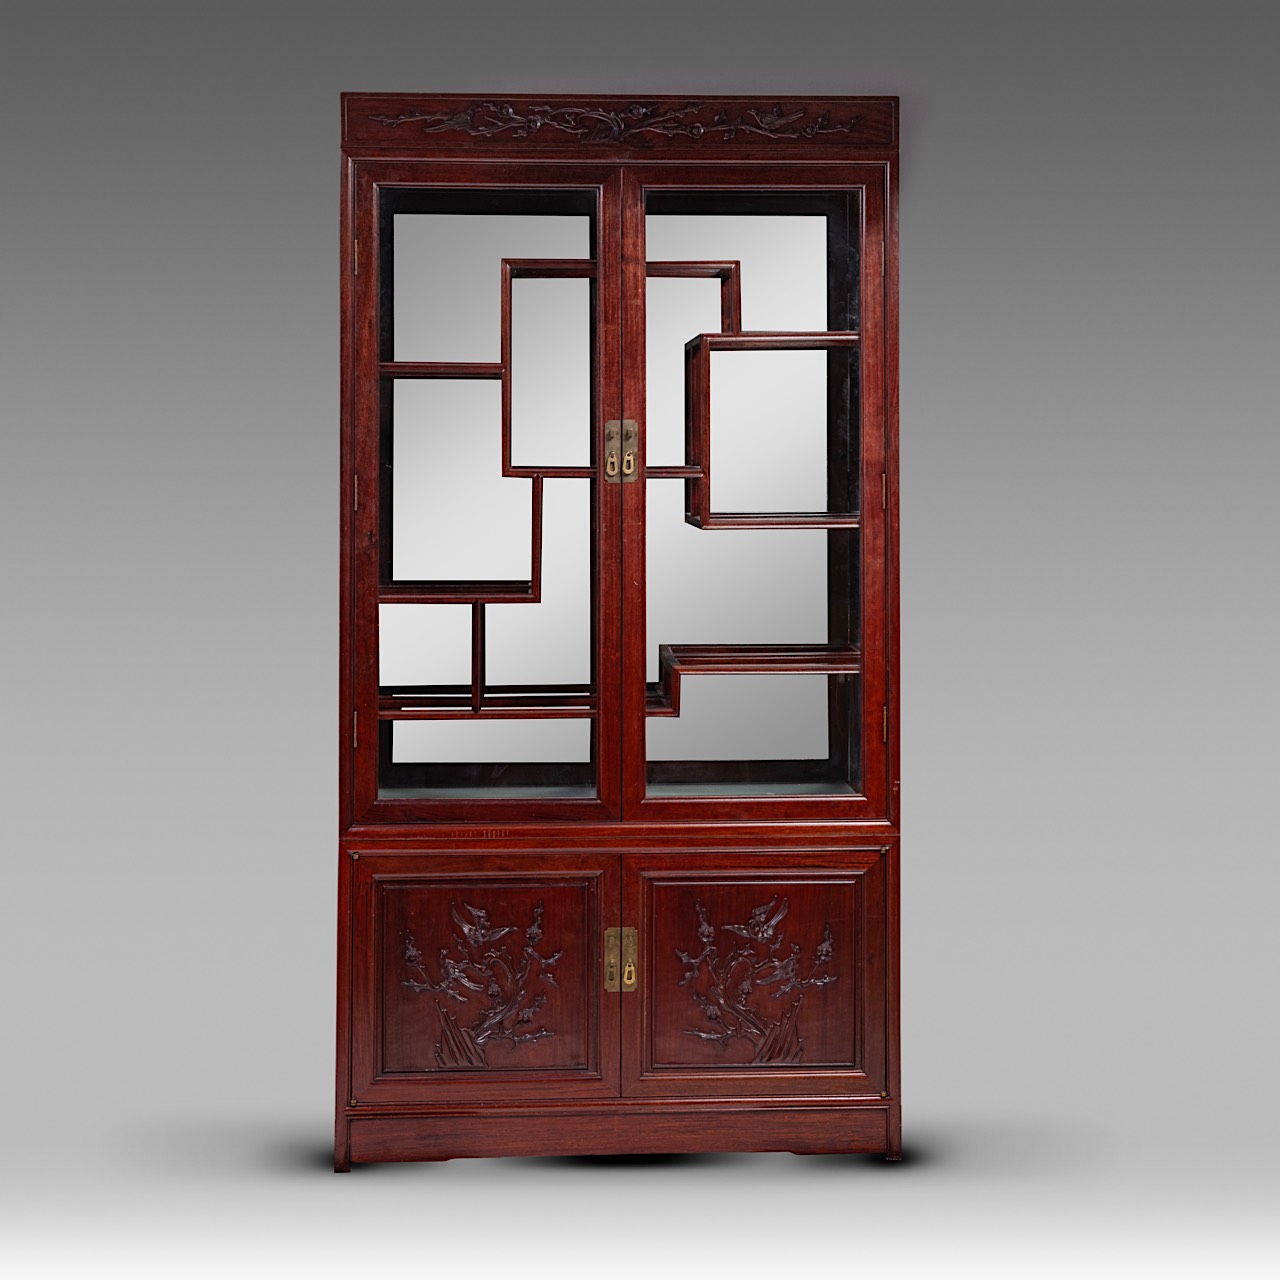 A Chinese hardwood display cabinet, with glass doors, 20thC, H 192 - W 102 - 33,5 cm